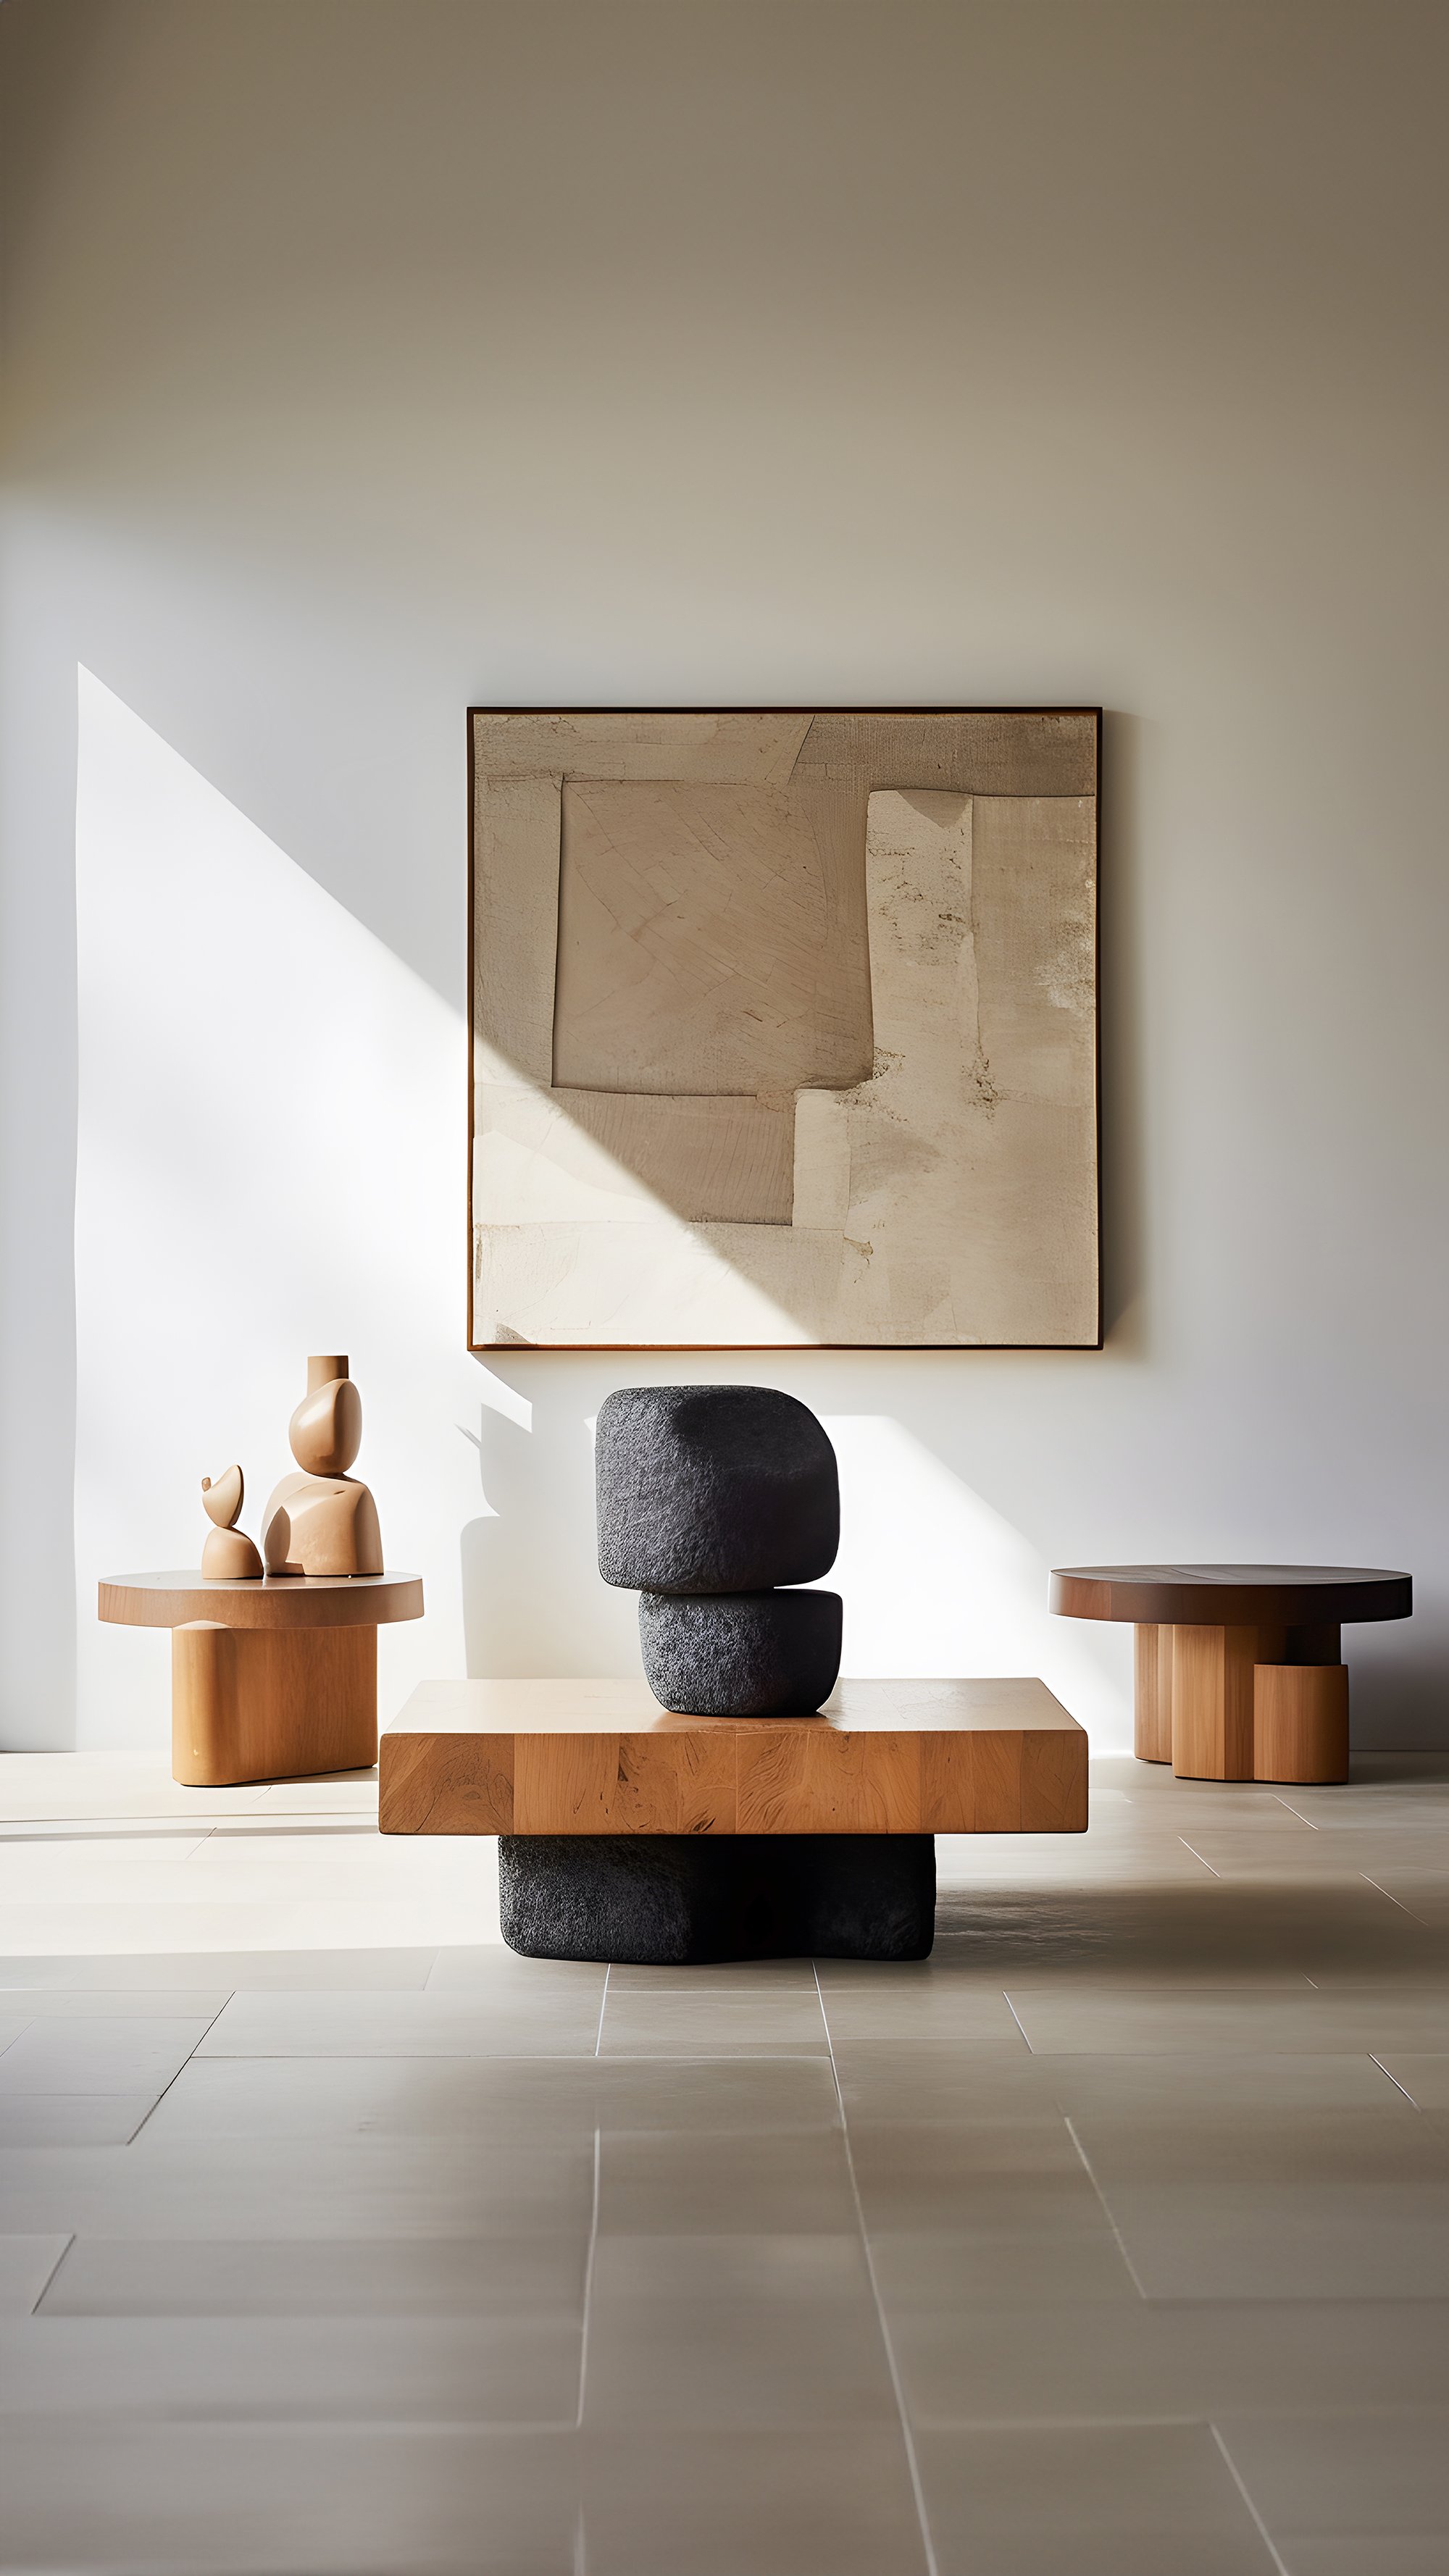 Sculpture-Inspired Unseen Force #28 Solid Wood Table by Joel Escalona, Decor Focus – 5.jpg